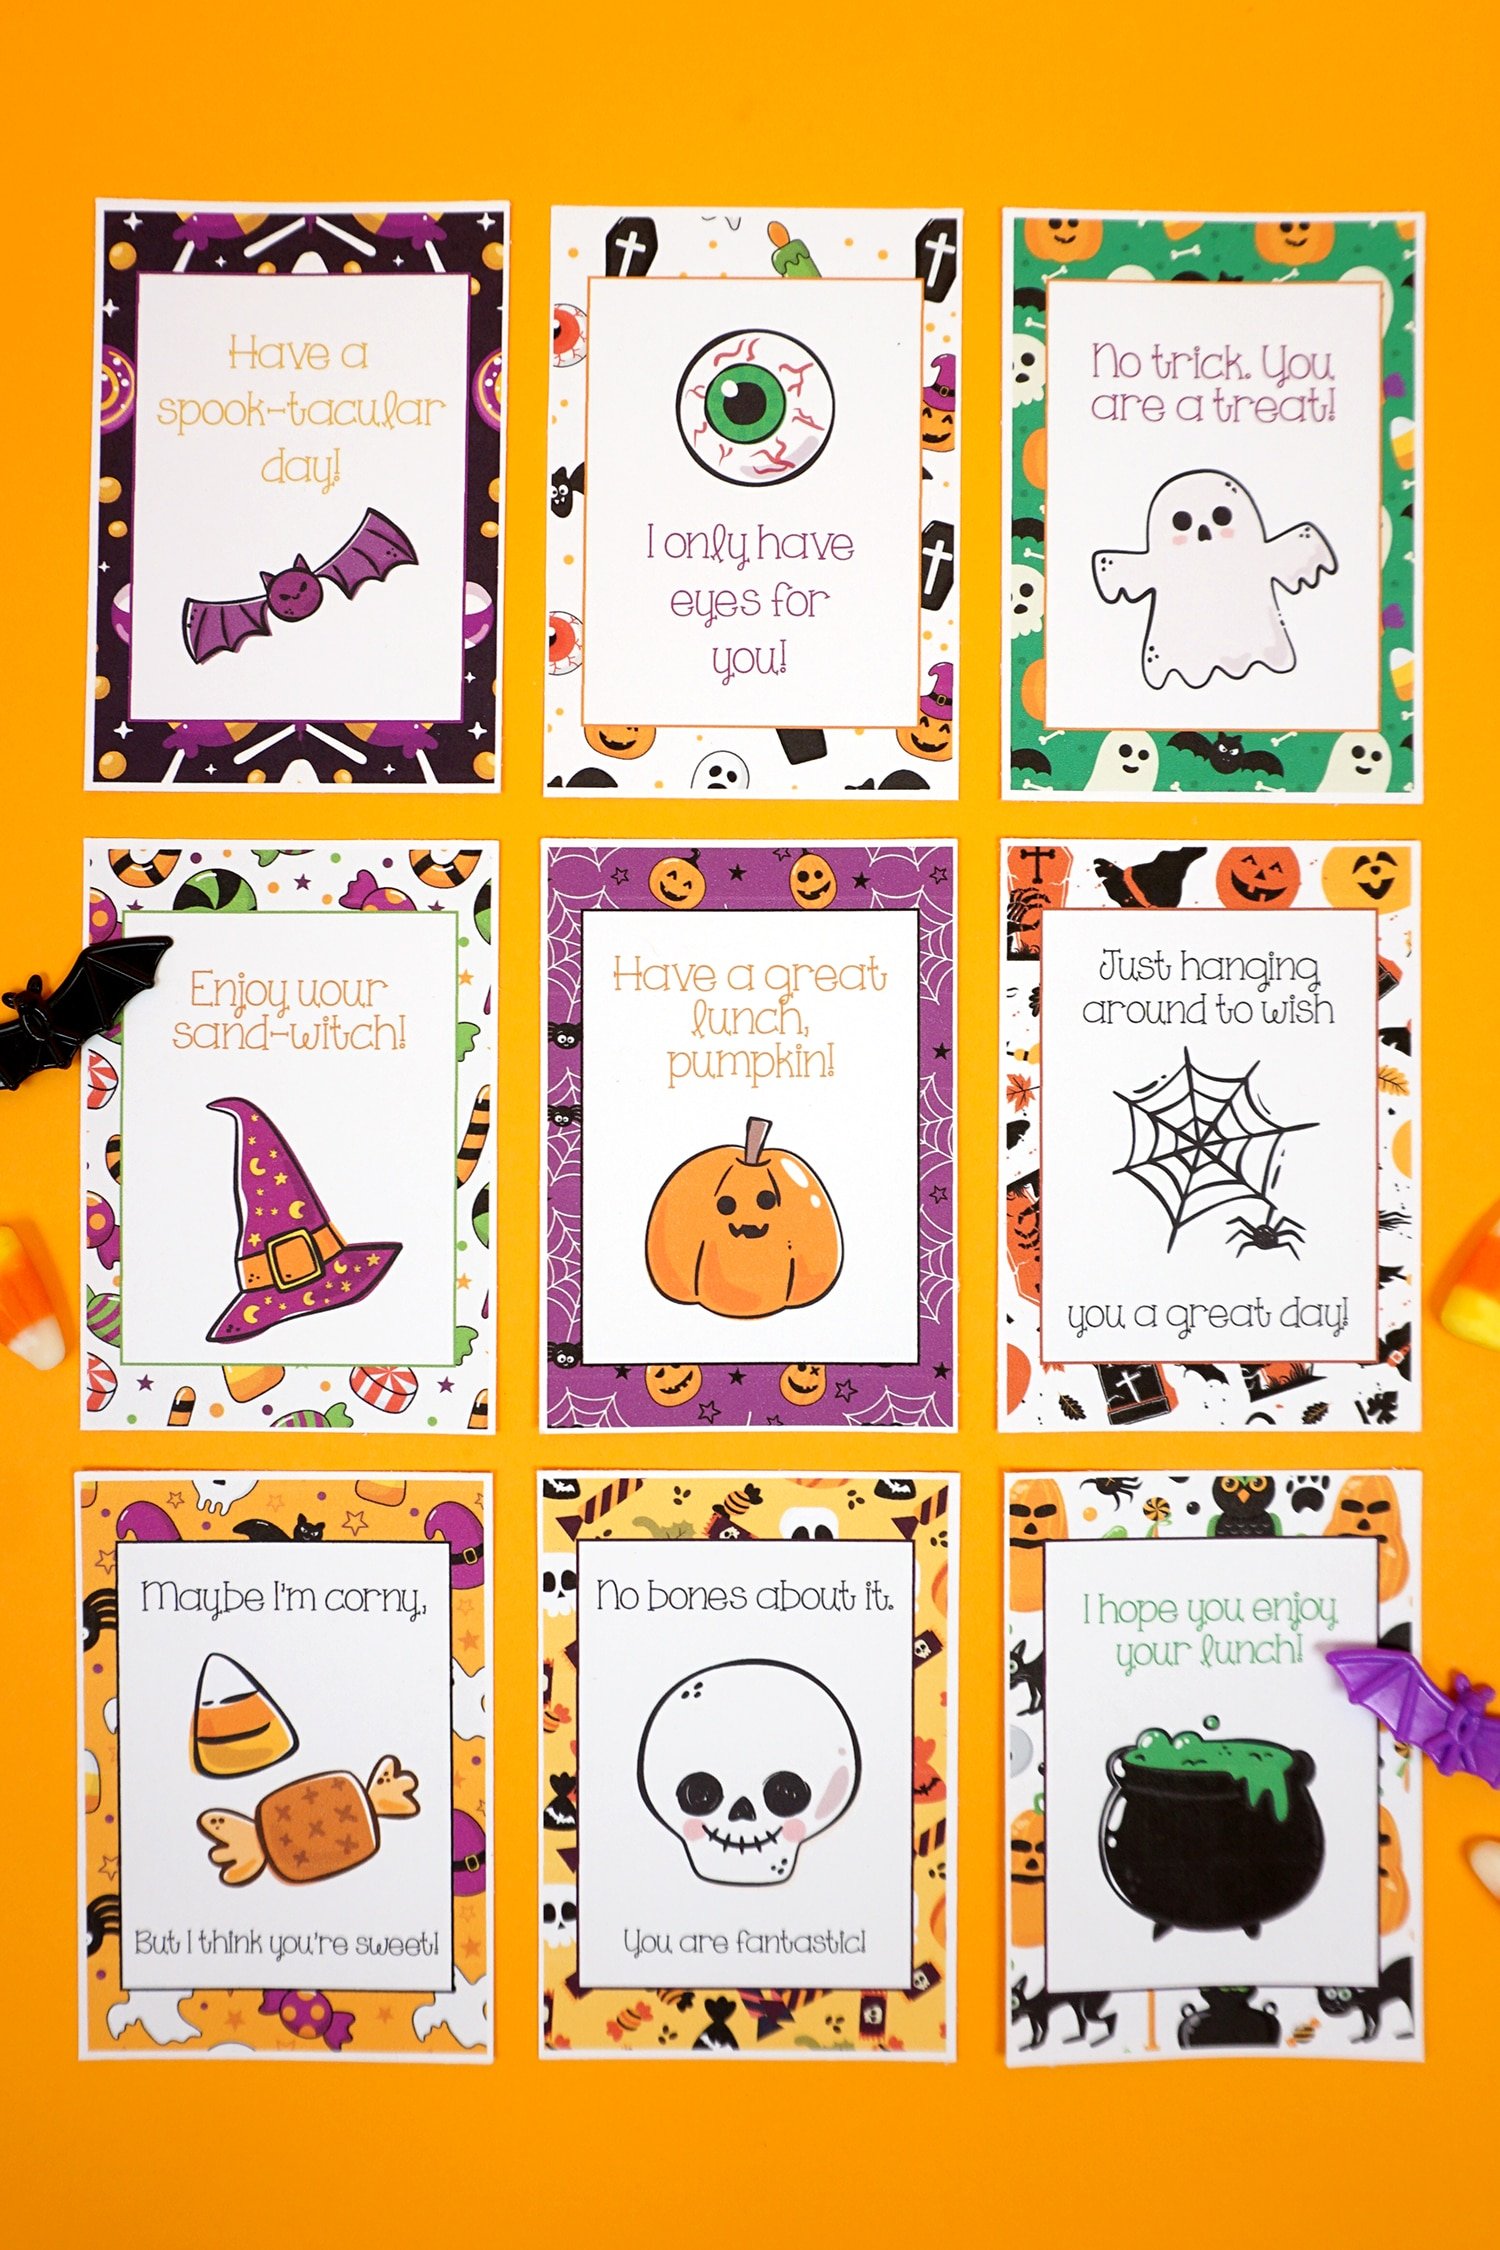 Halloween lunch notes arranged in a grid on an orange background with candy corn and batd